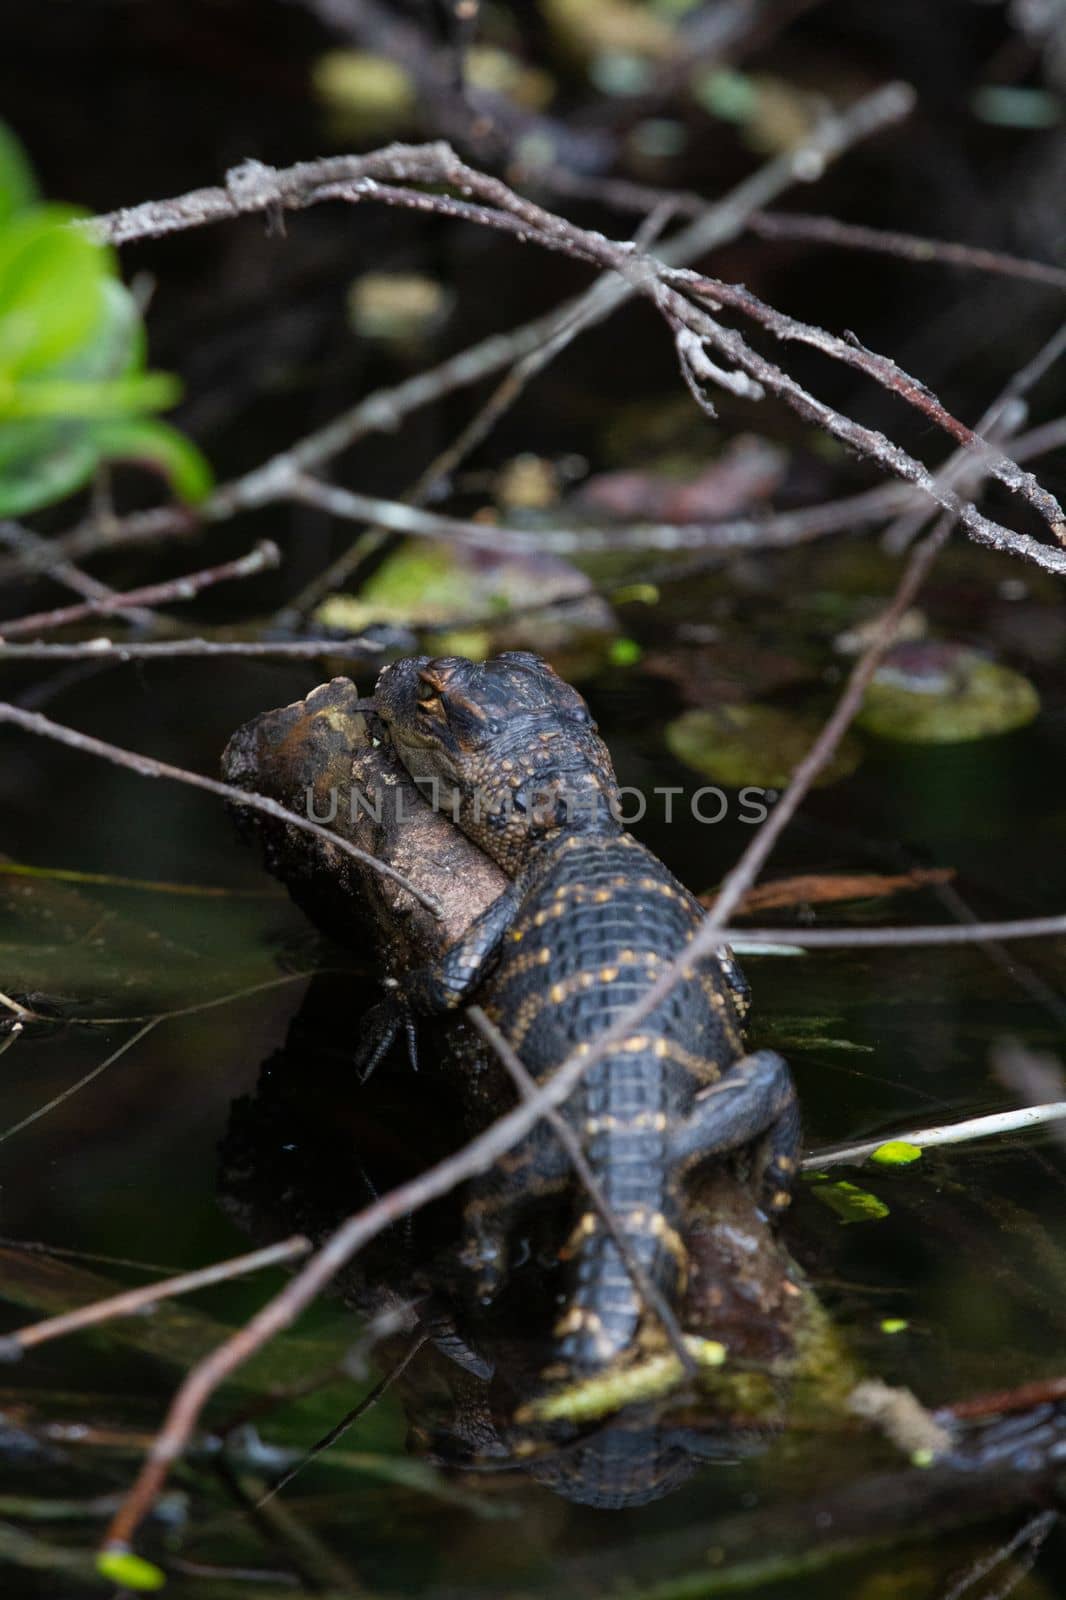 A young American alligator hiding between plants and sleeping by Granchinho